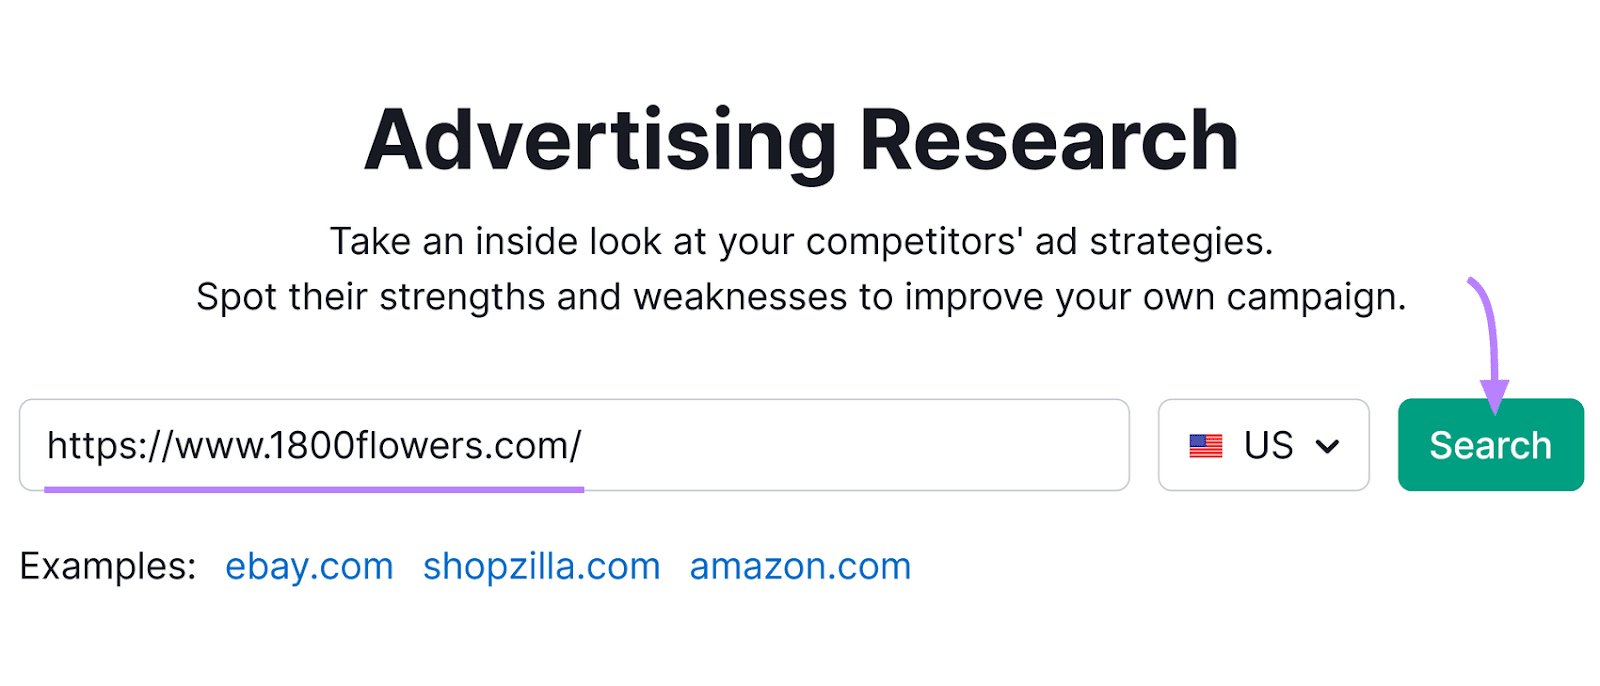 "Advertising Research" tool with "1800flowers.com" entered in the text field and the "Search" button highlighted with arrow.